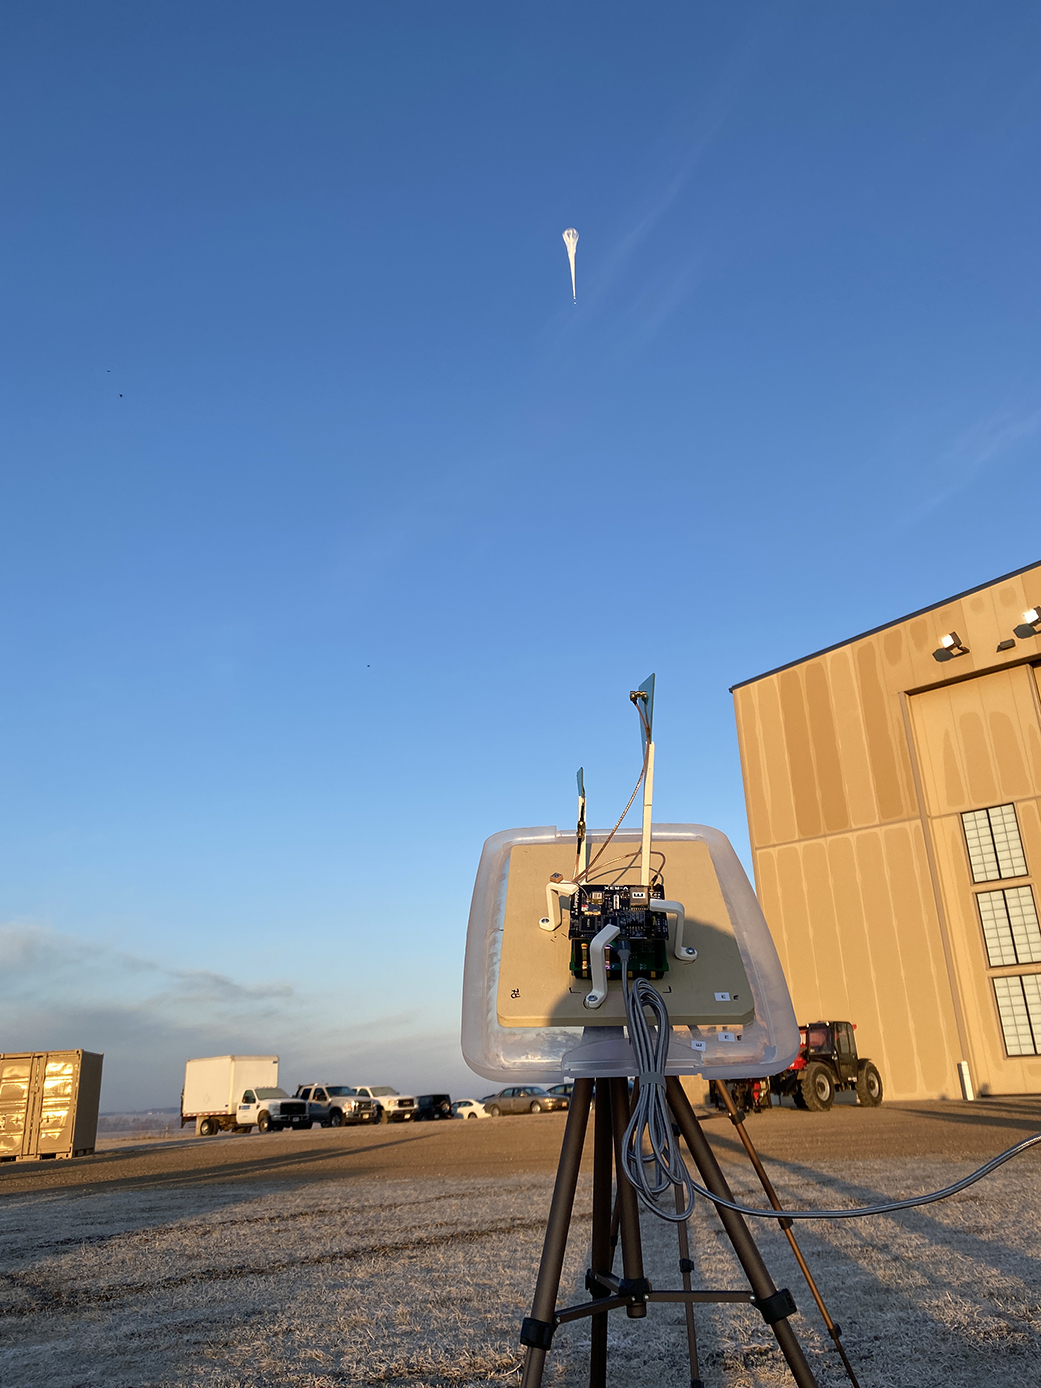 The V-R3x ground station at the launch site in Baltic, SD tracks the V-R3x payload aboard Raven Aerostar's high-altitude balloonas it ascends to test the technology's communication capabilities (Image: NASA / Anh Nguyen)